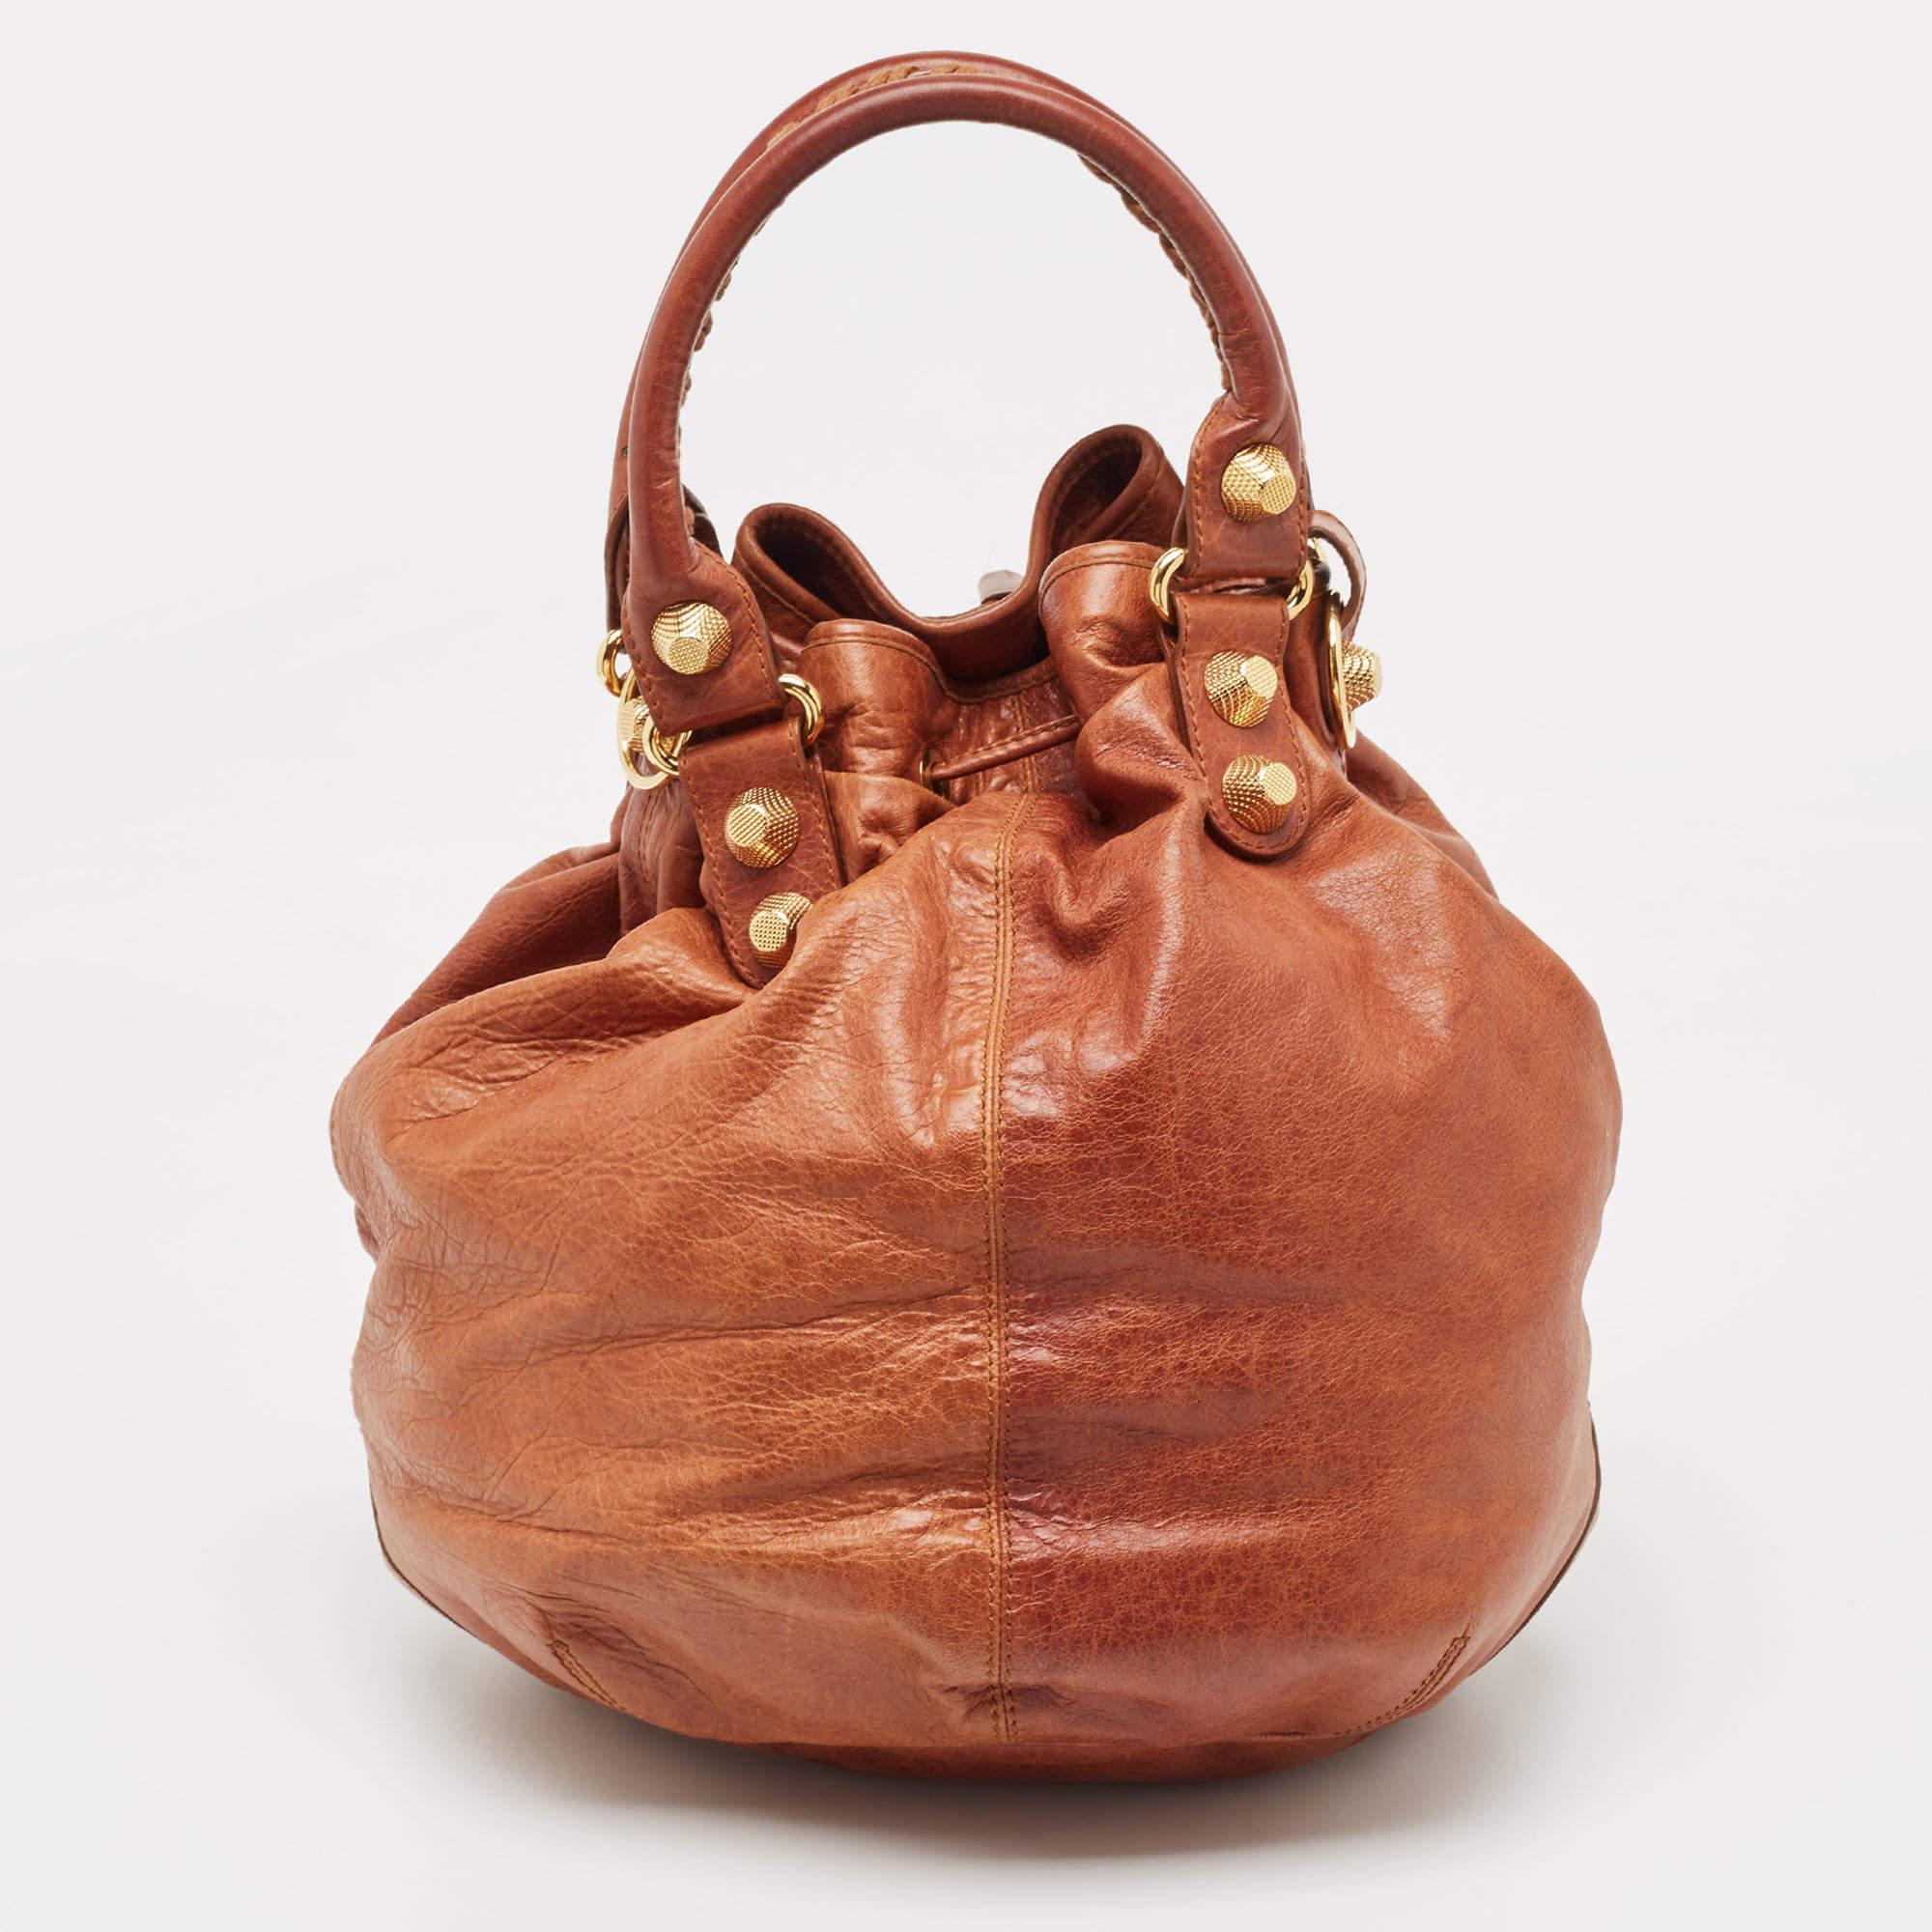 This Balenciaga 'PomPon' bag will become your favourite daytime wardrobe addition! It is crafted from brown leather and accented with signature gold-tone metal studs and other hardware details. The exterior is accented with rolled top handles, zip